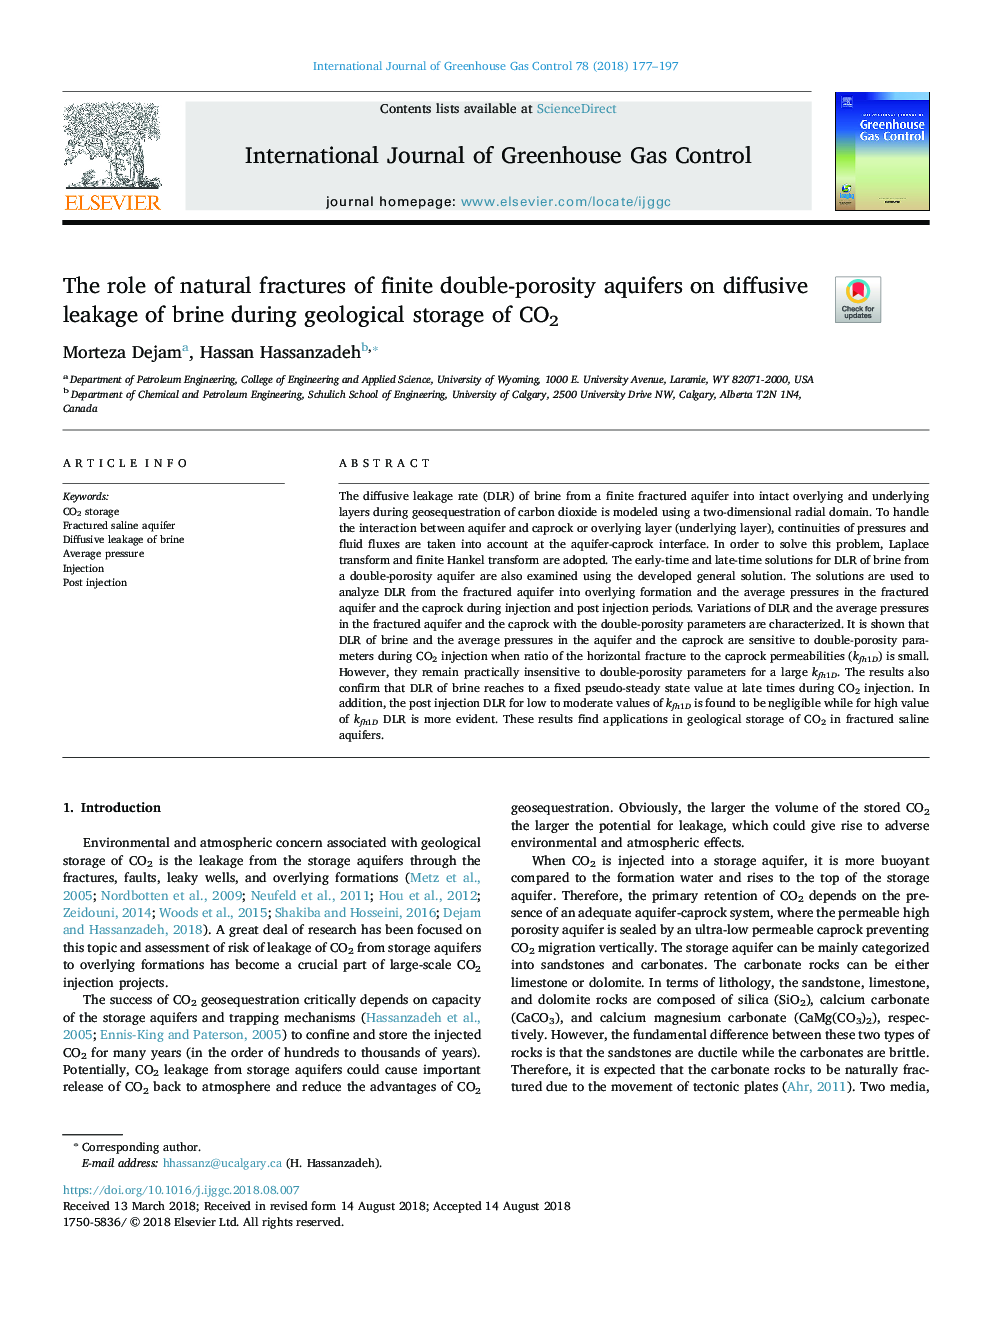 The role of natural fractures of finite double-porosity aquifers on diffusive leakage of brine during geological storage of CO2